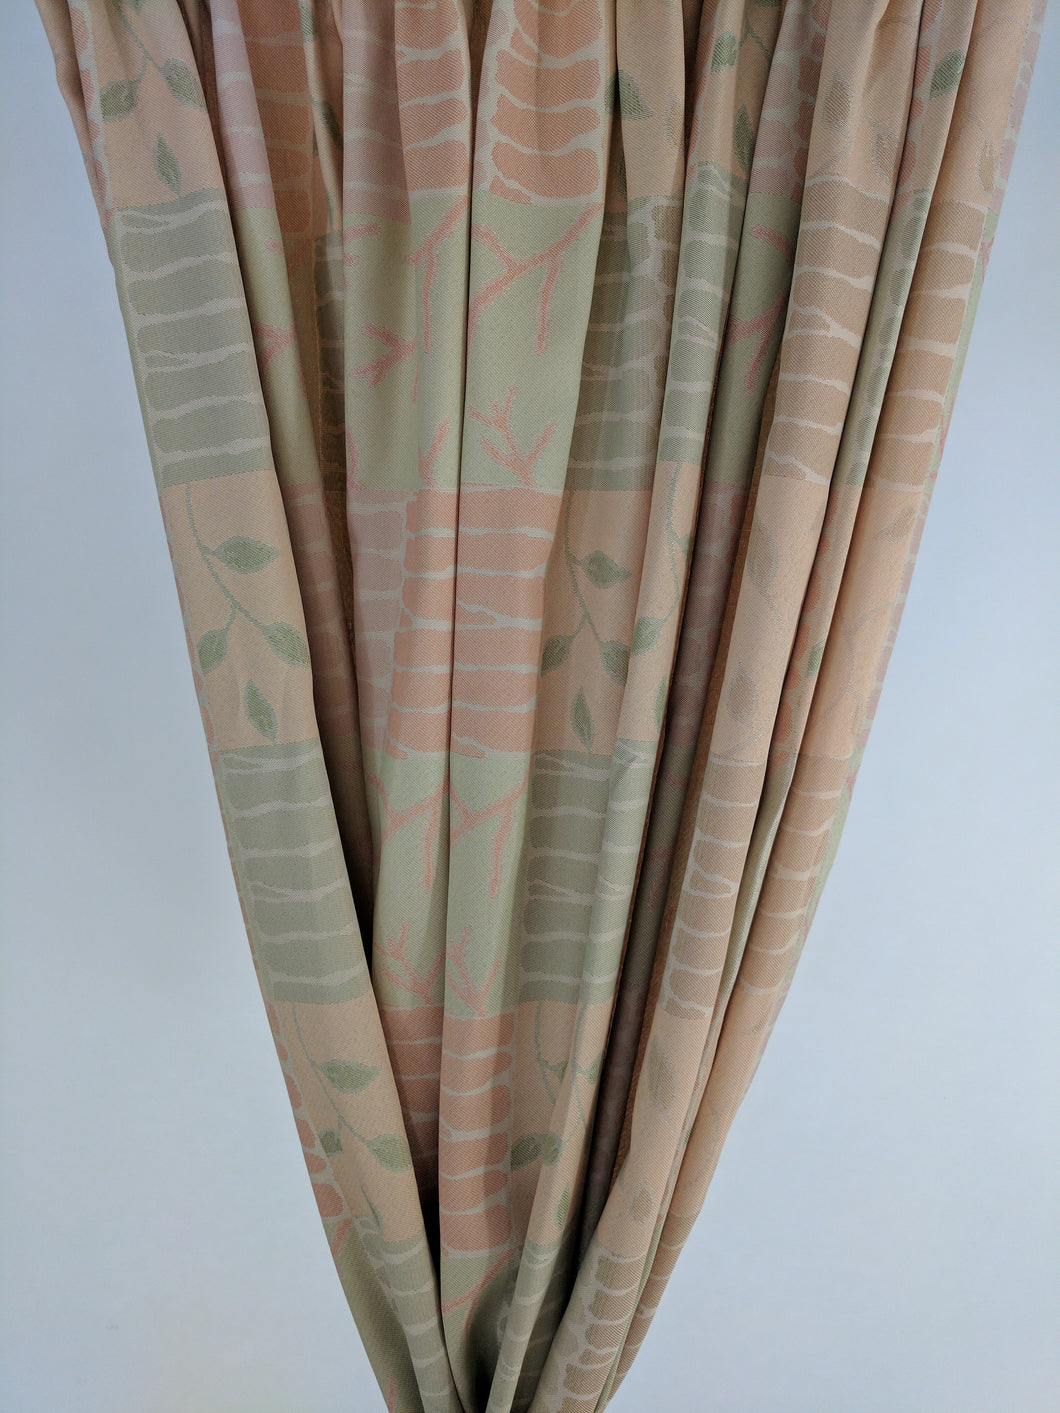 9406 - Vintage Institutional Office / School / Hospital Curtains